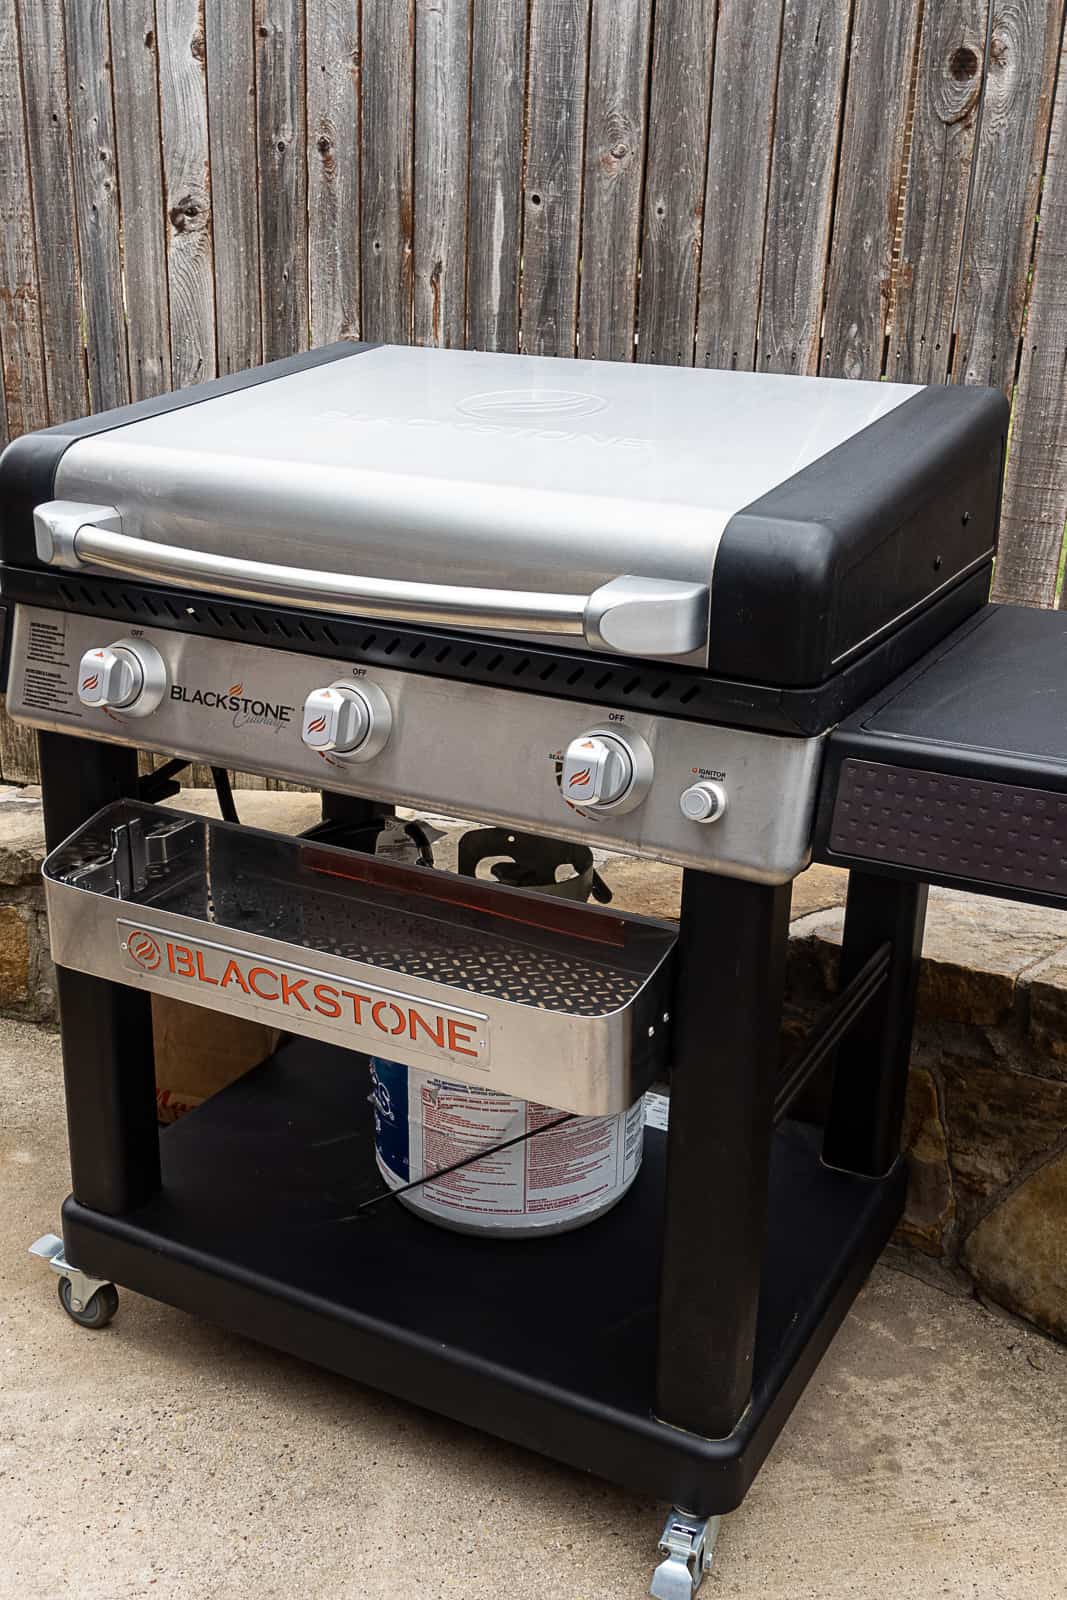 New Blackstone Griddle Grill